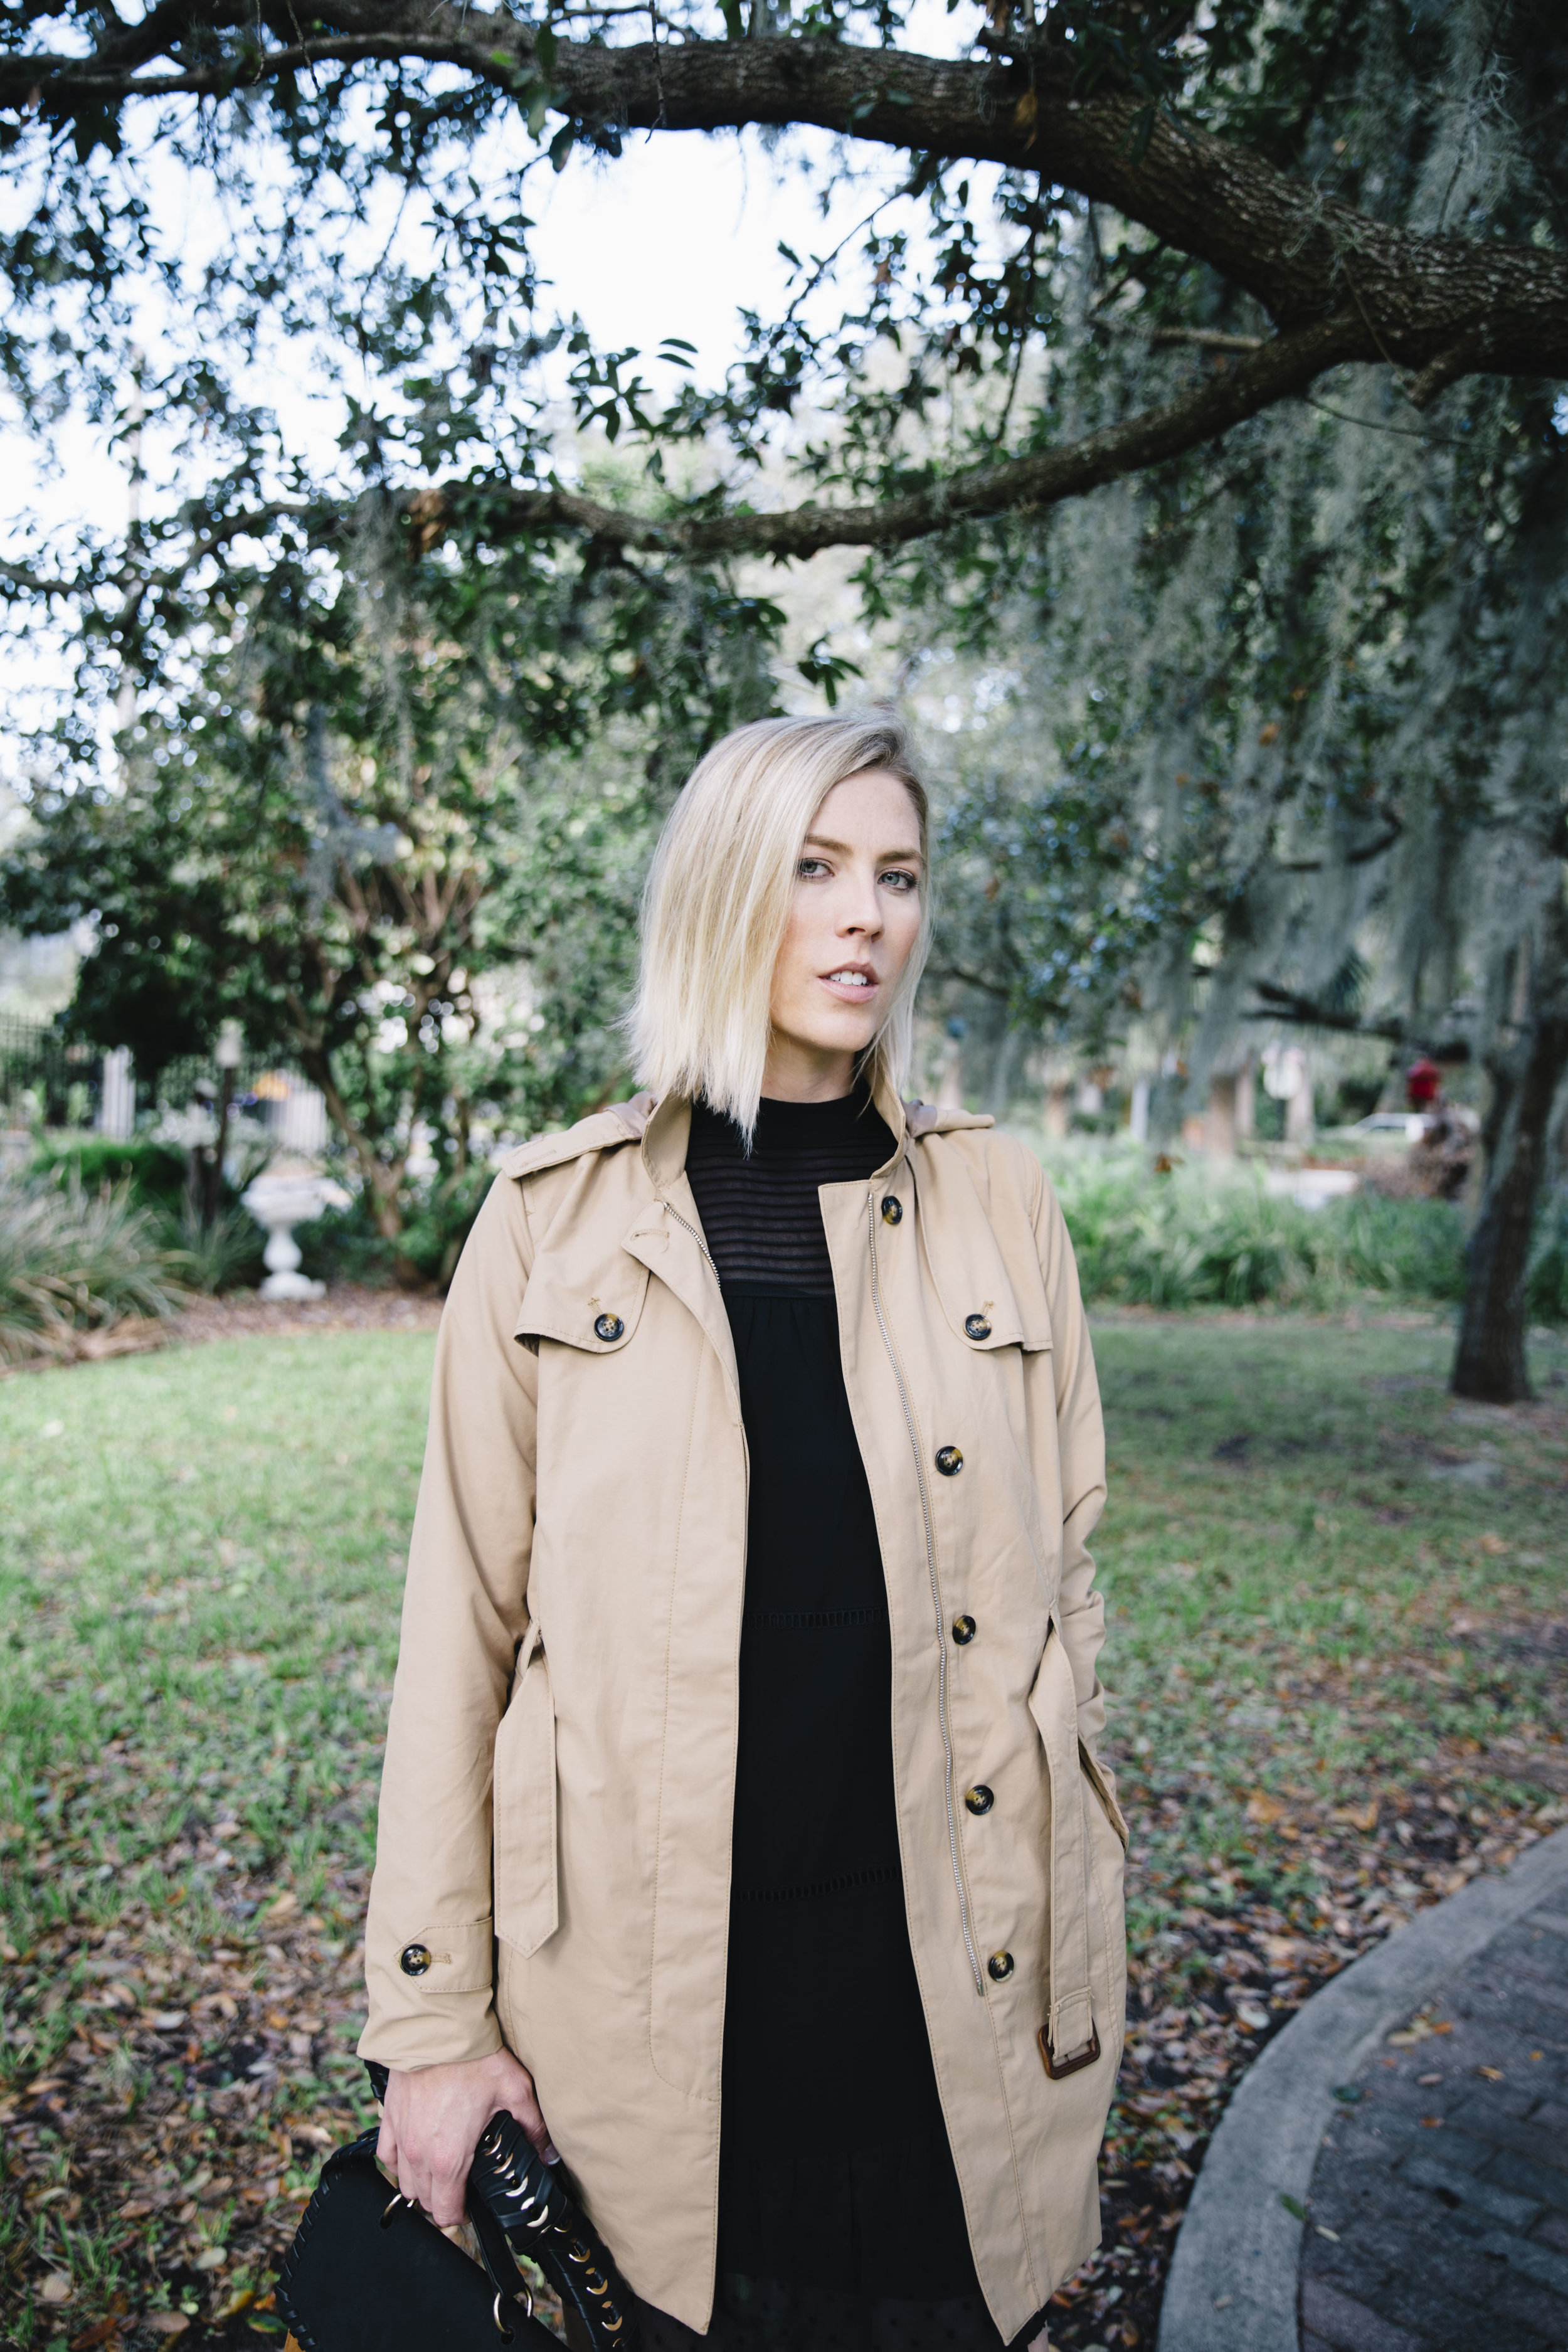 The Borrowed Babes Fashion Blogger Stephanie Mack Kearney wearing Target Style – A New Day Trench Coat with Who What Wear Dress and Handbag 